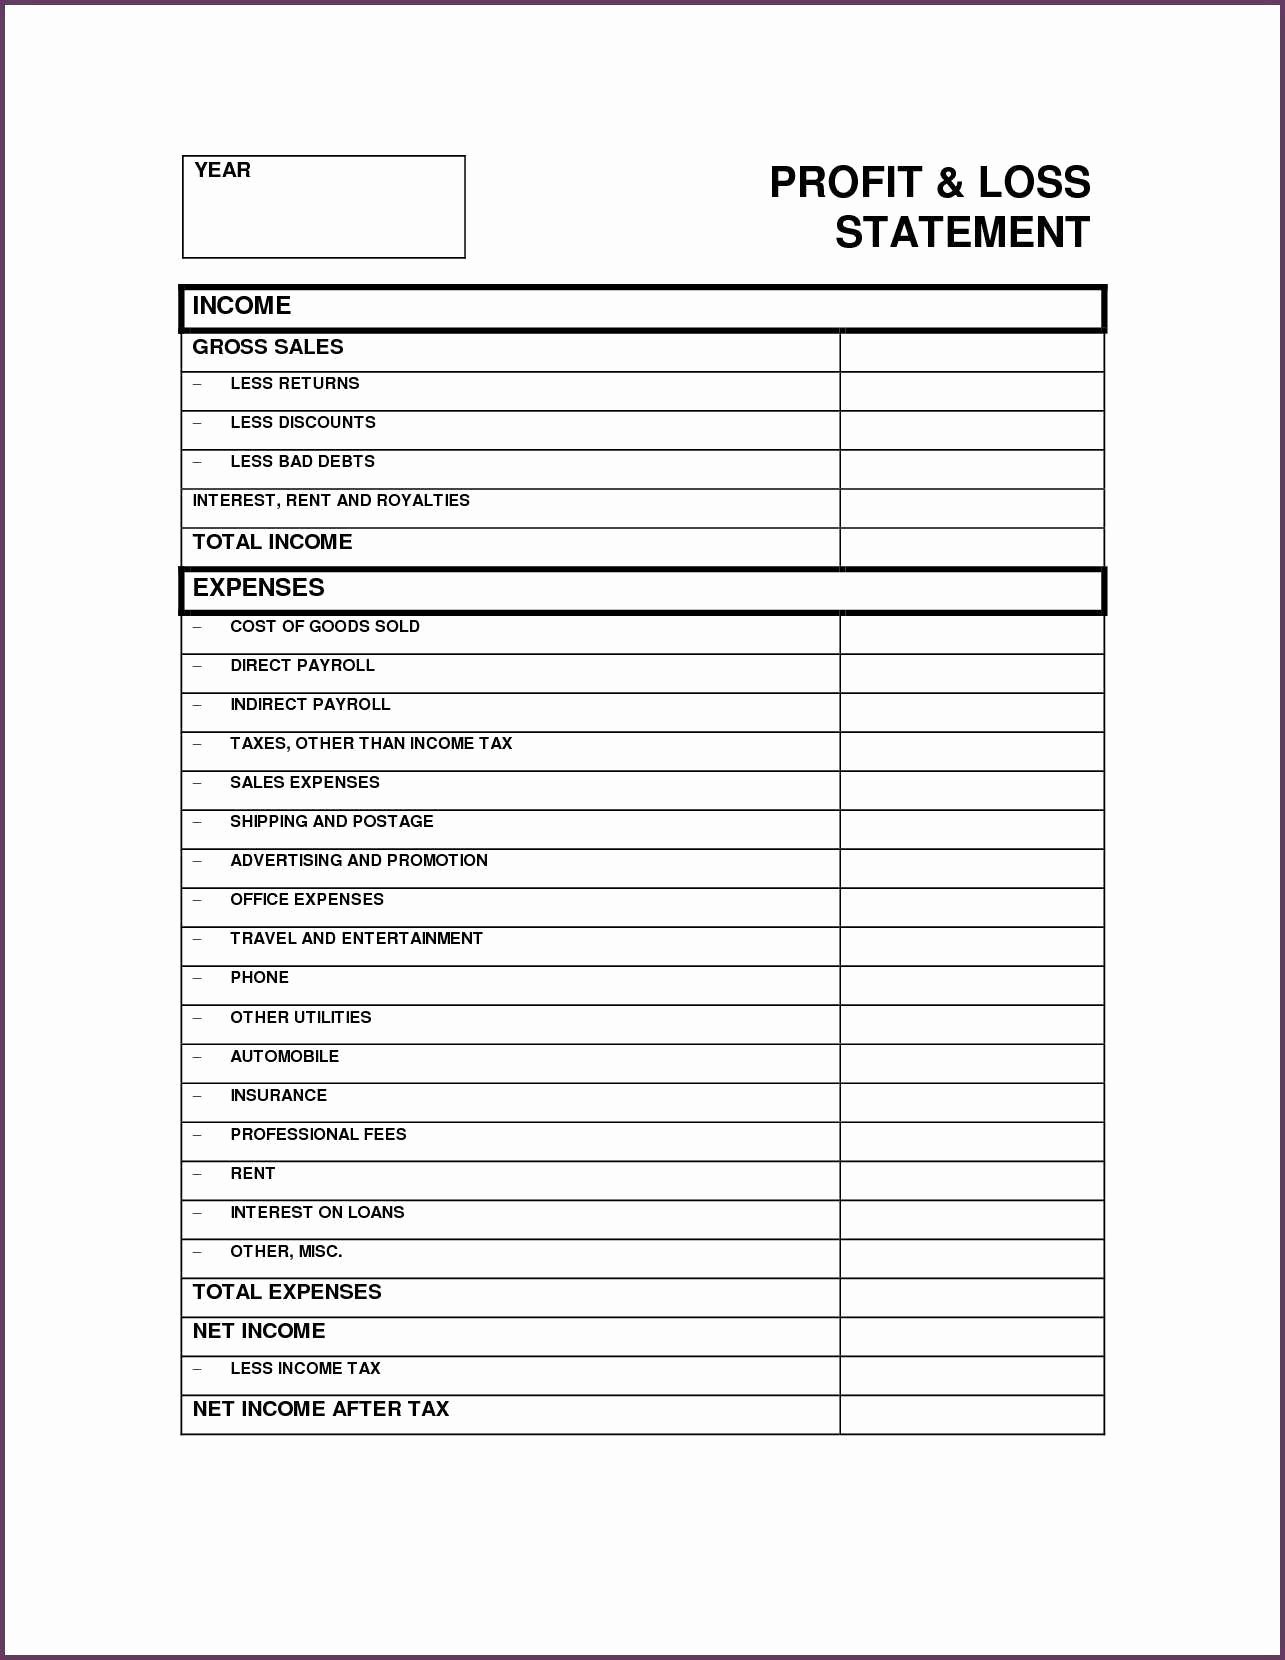 P and L Statement Template Inspirational P &amp; L Statement Template Sample Worksheets Restaurant P&amp;l